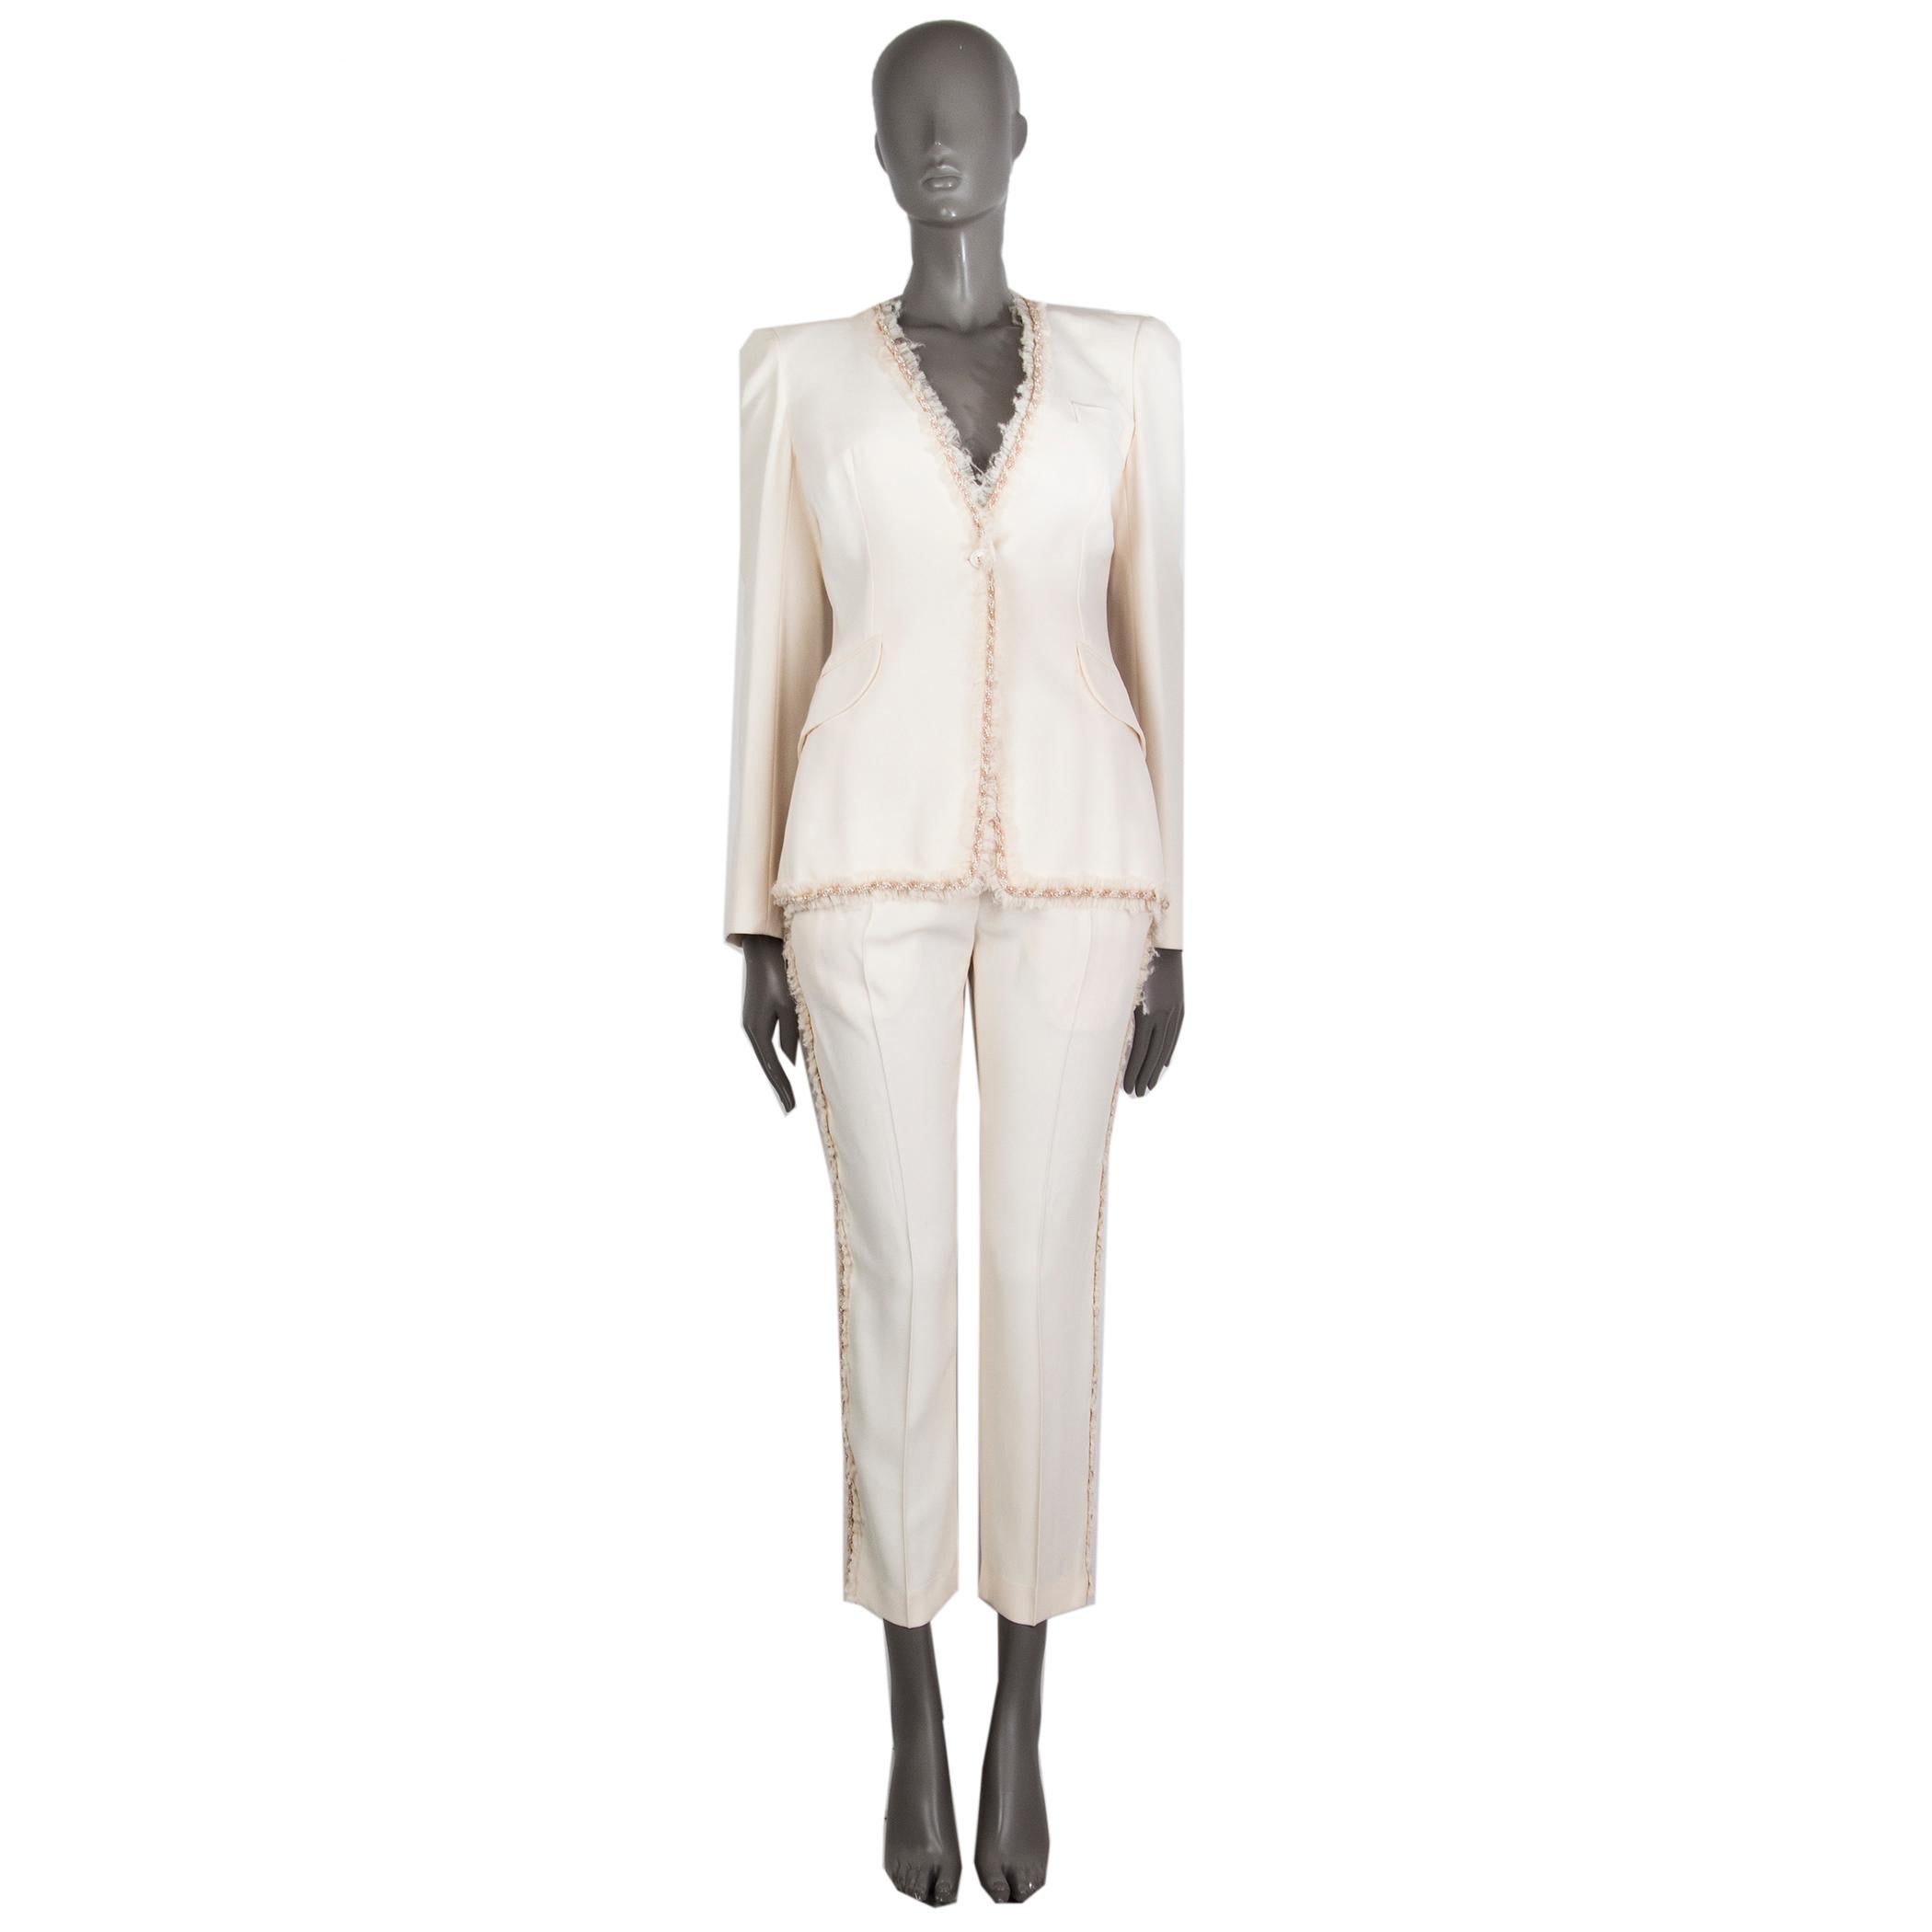 100% authentic Alexander McQueen collarless blazer in light cream acetate (45%), viscose (45%), and silk (10%). With beaded braid and fray trimmings, two flap pockets on the sides, buttoned cuffs, and slit on the back. Closes with nacre button on